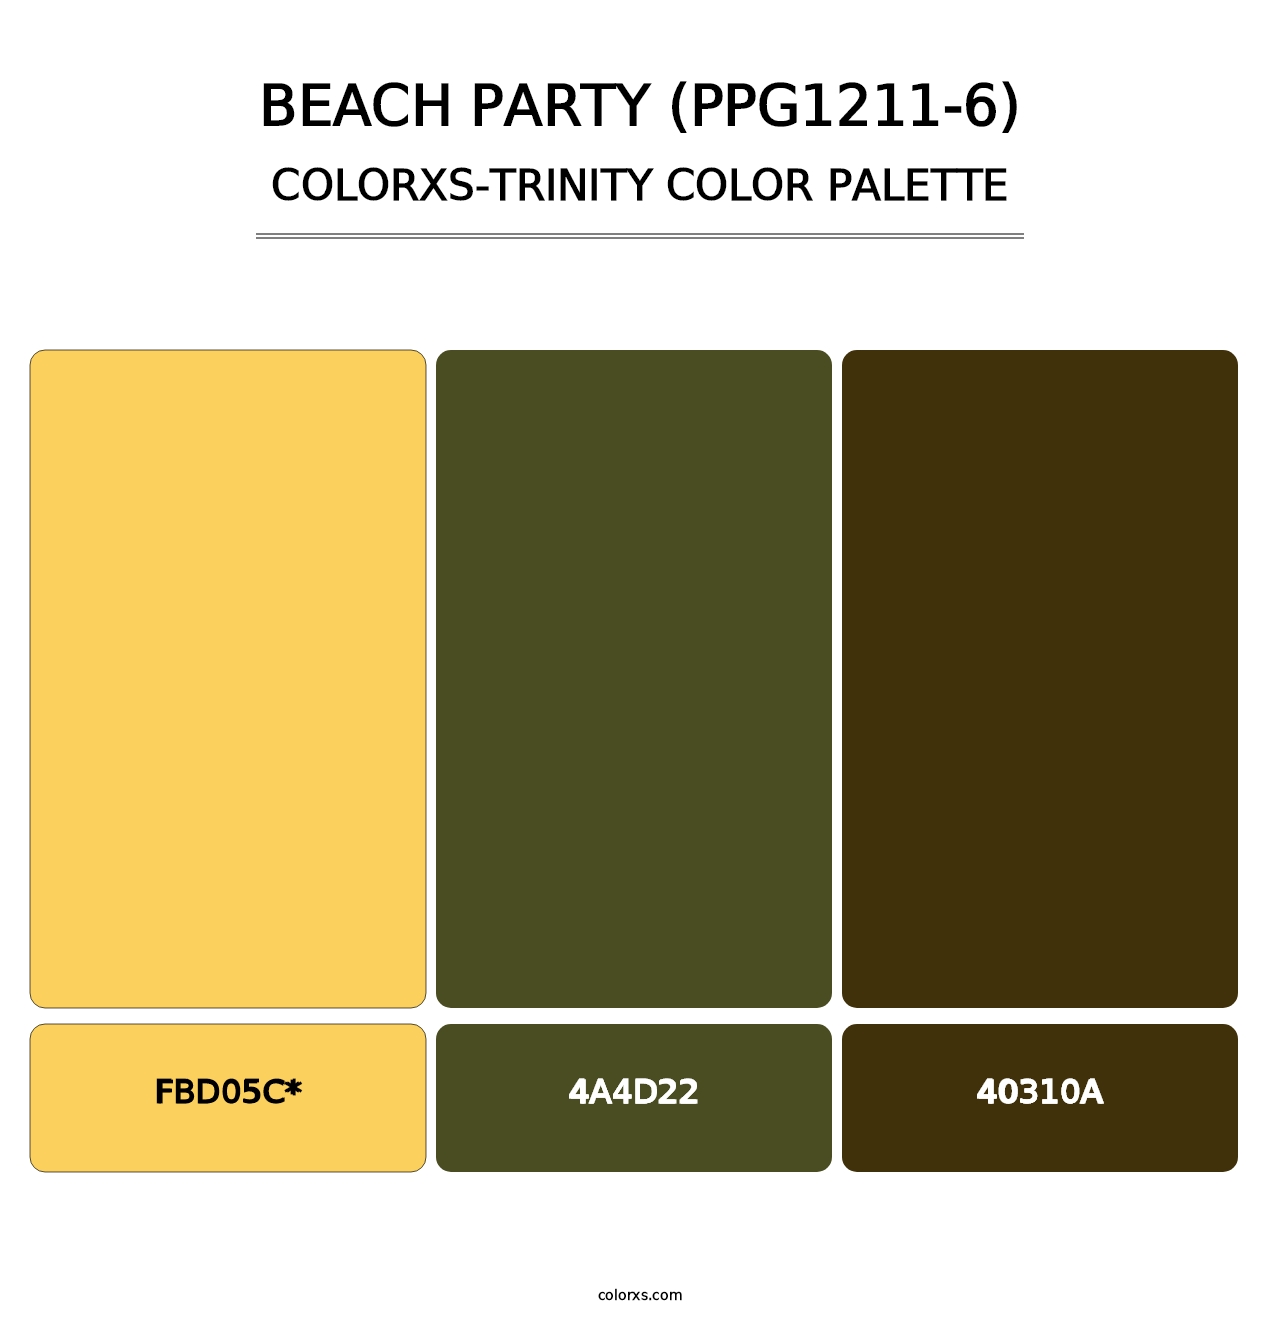 Beach Party (PPG1211-6) - Colorxs Trinity Palette